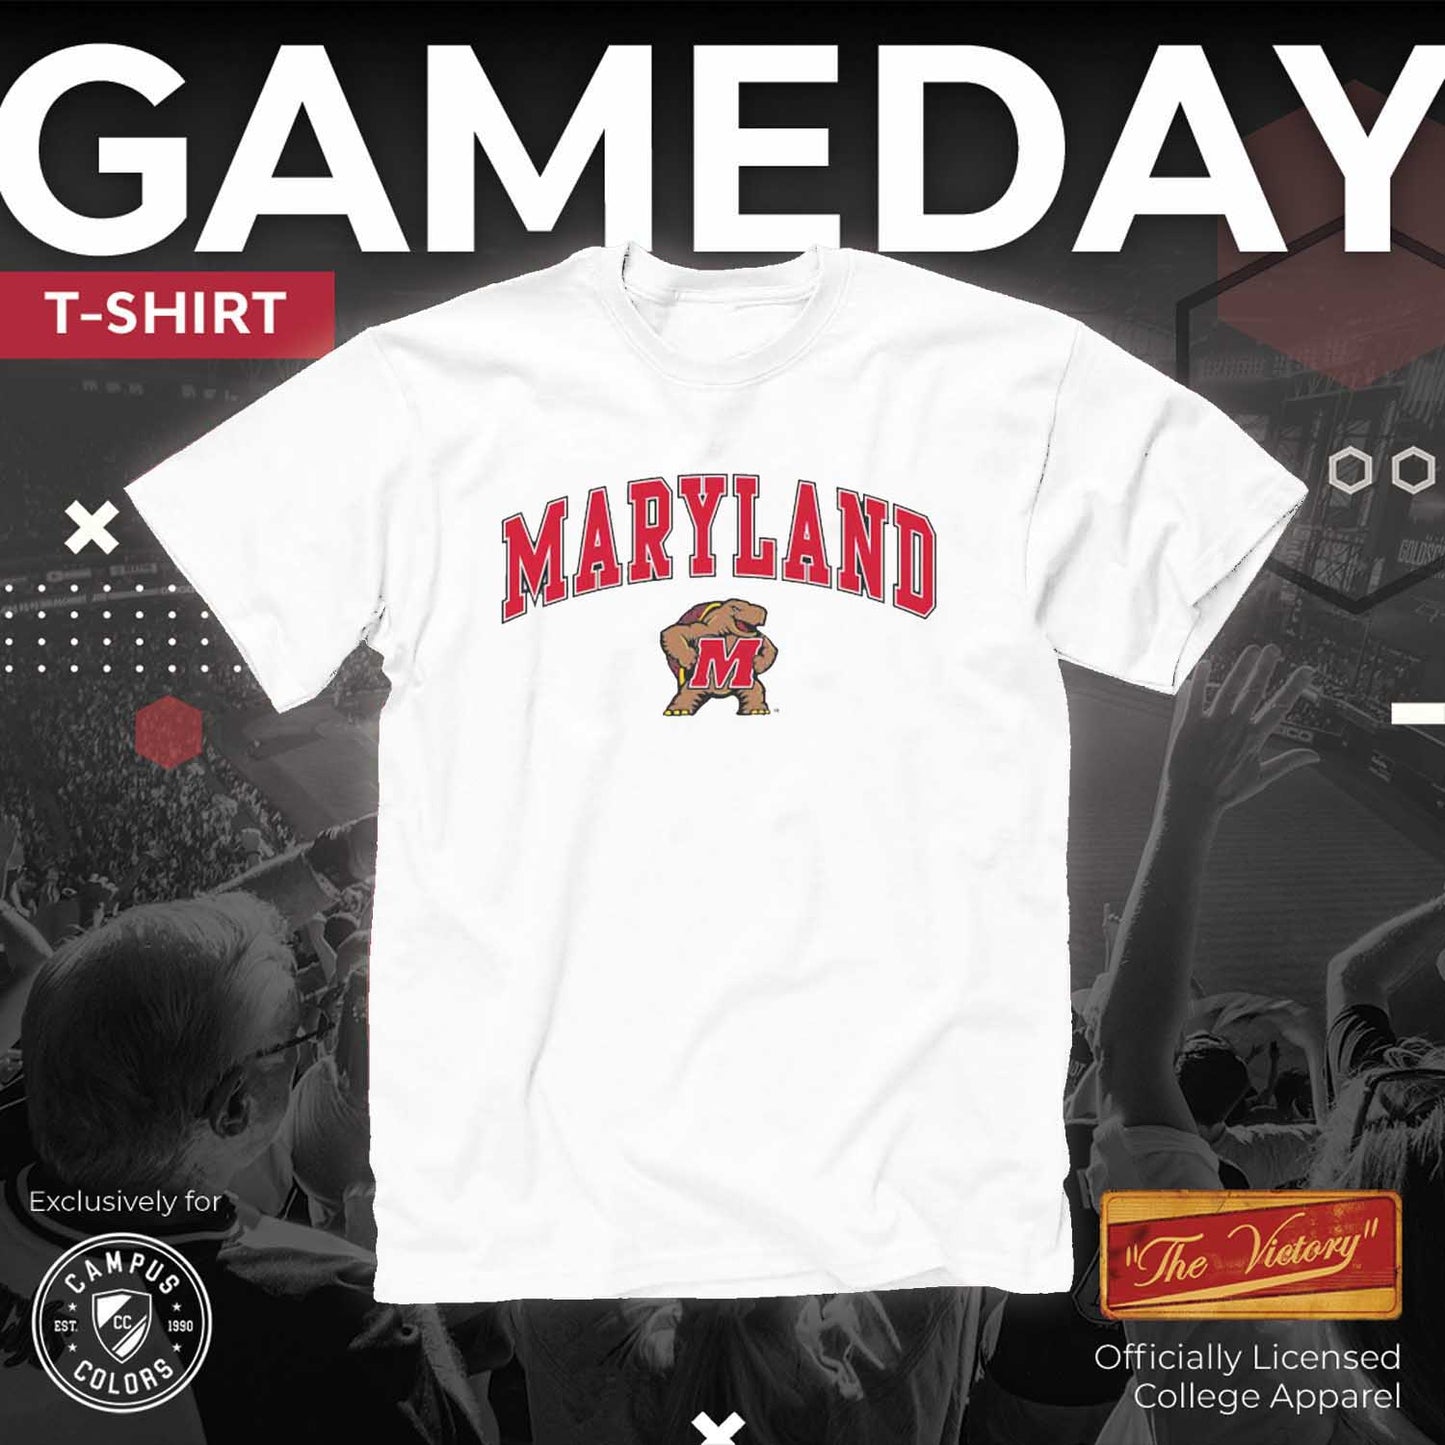 Maryland Terrapins NCAA Adult Gameday Cotton T-Shirt - White